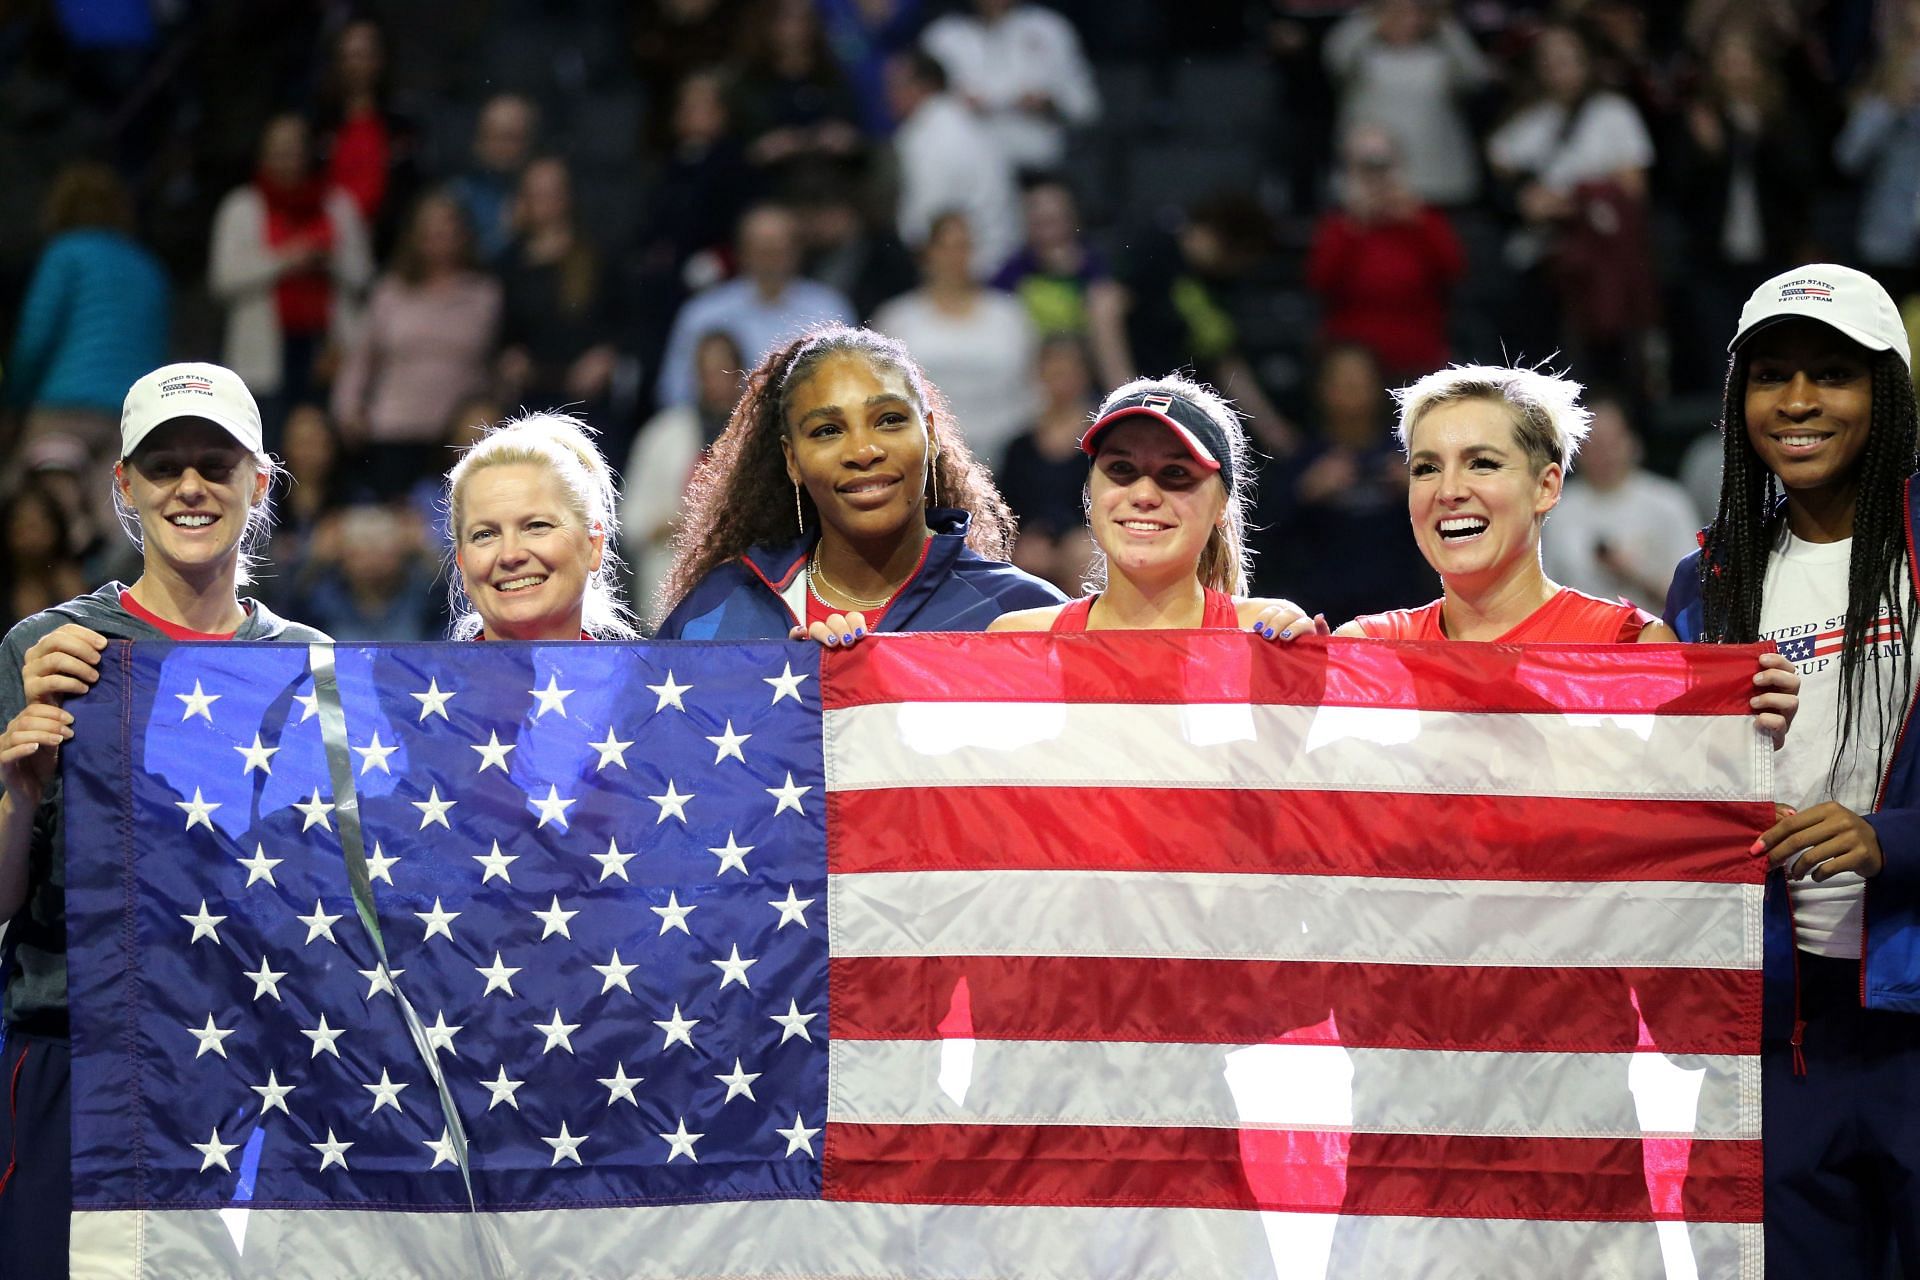 Coco Gauff (rightmost) and Serena Williams (third from left) pose for a photo with (L-R) Alison Riske, Kathy Rinaldi, Sofia Kenin and Bethanie Mattek-Sands in the 2020 Fed Cup.